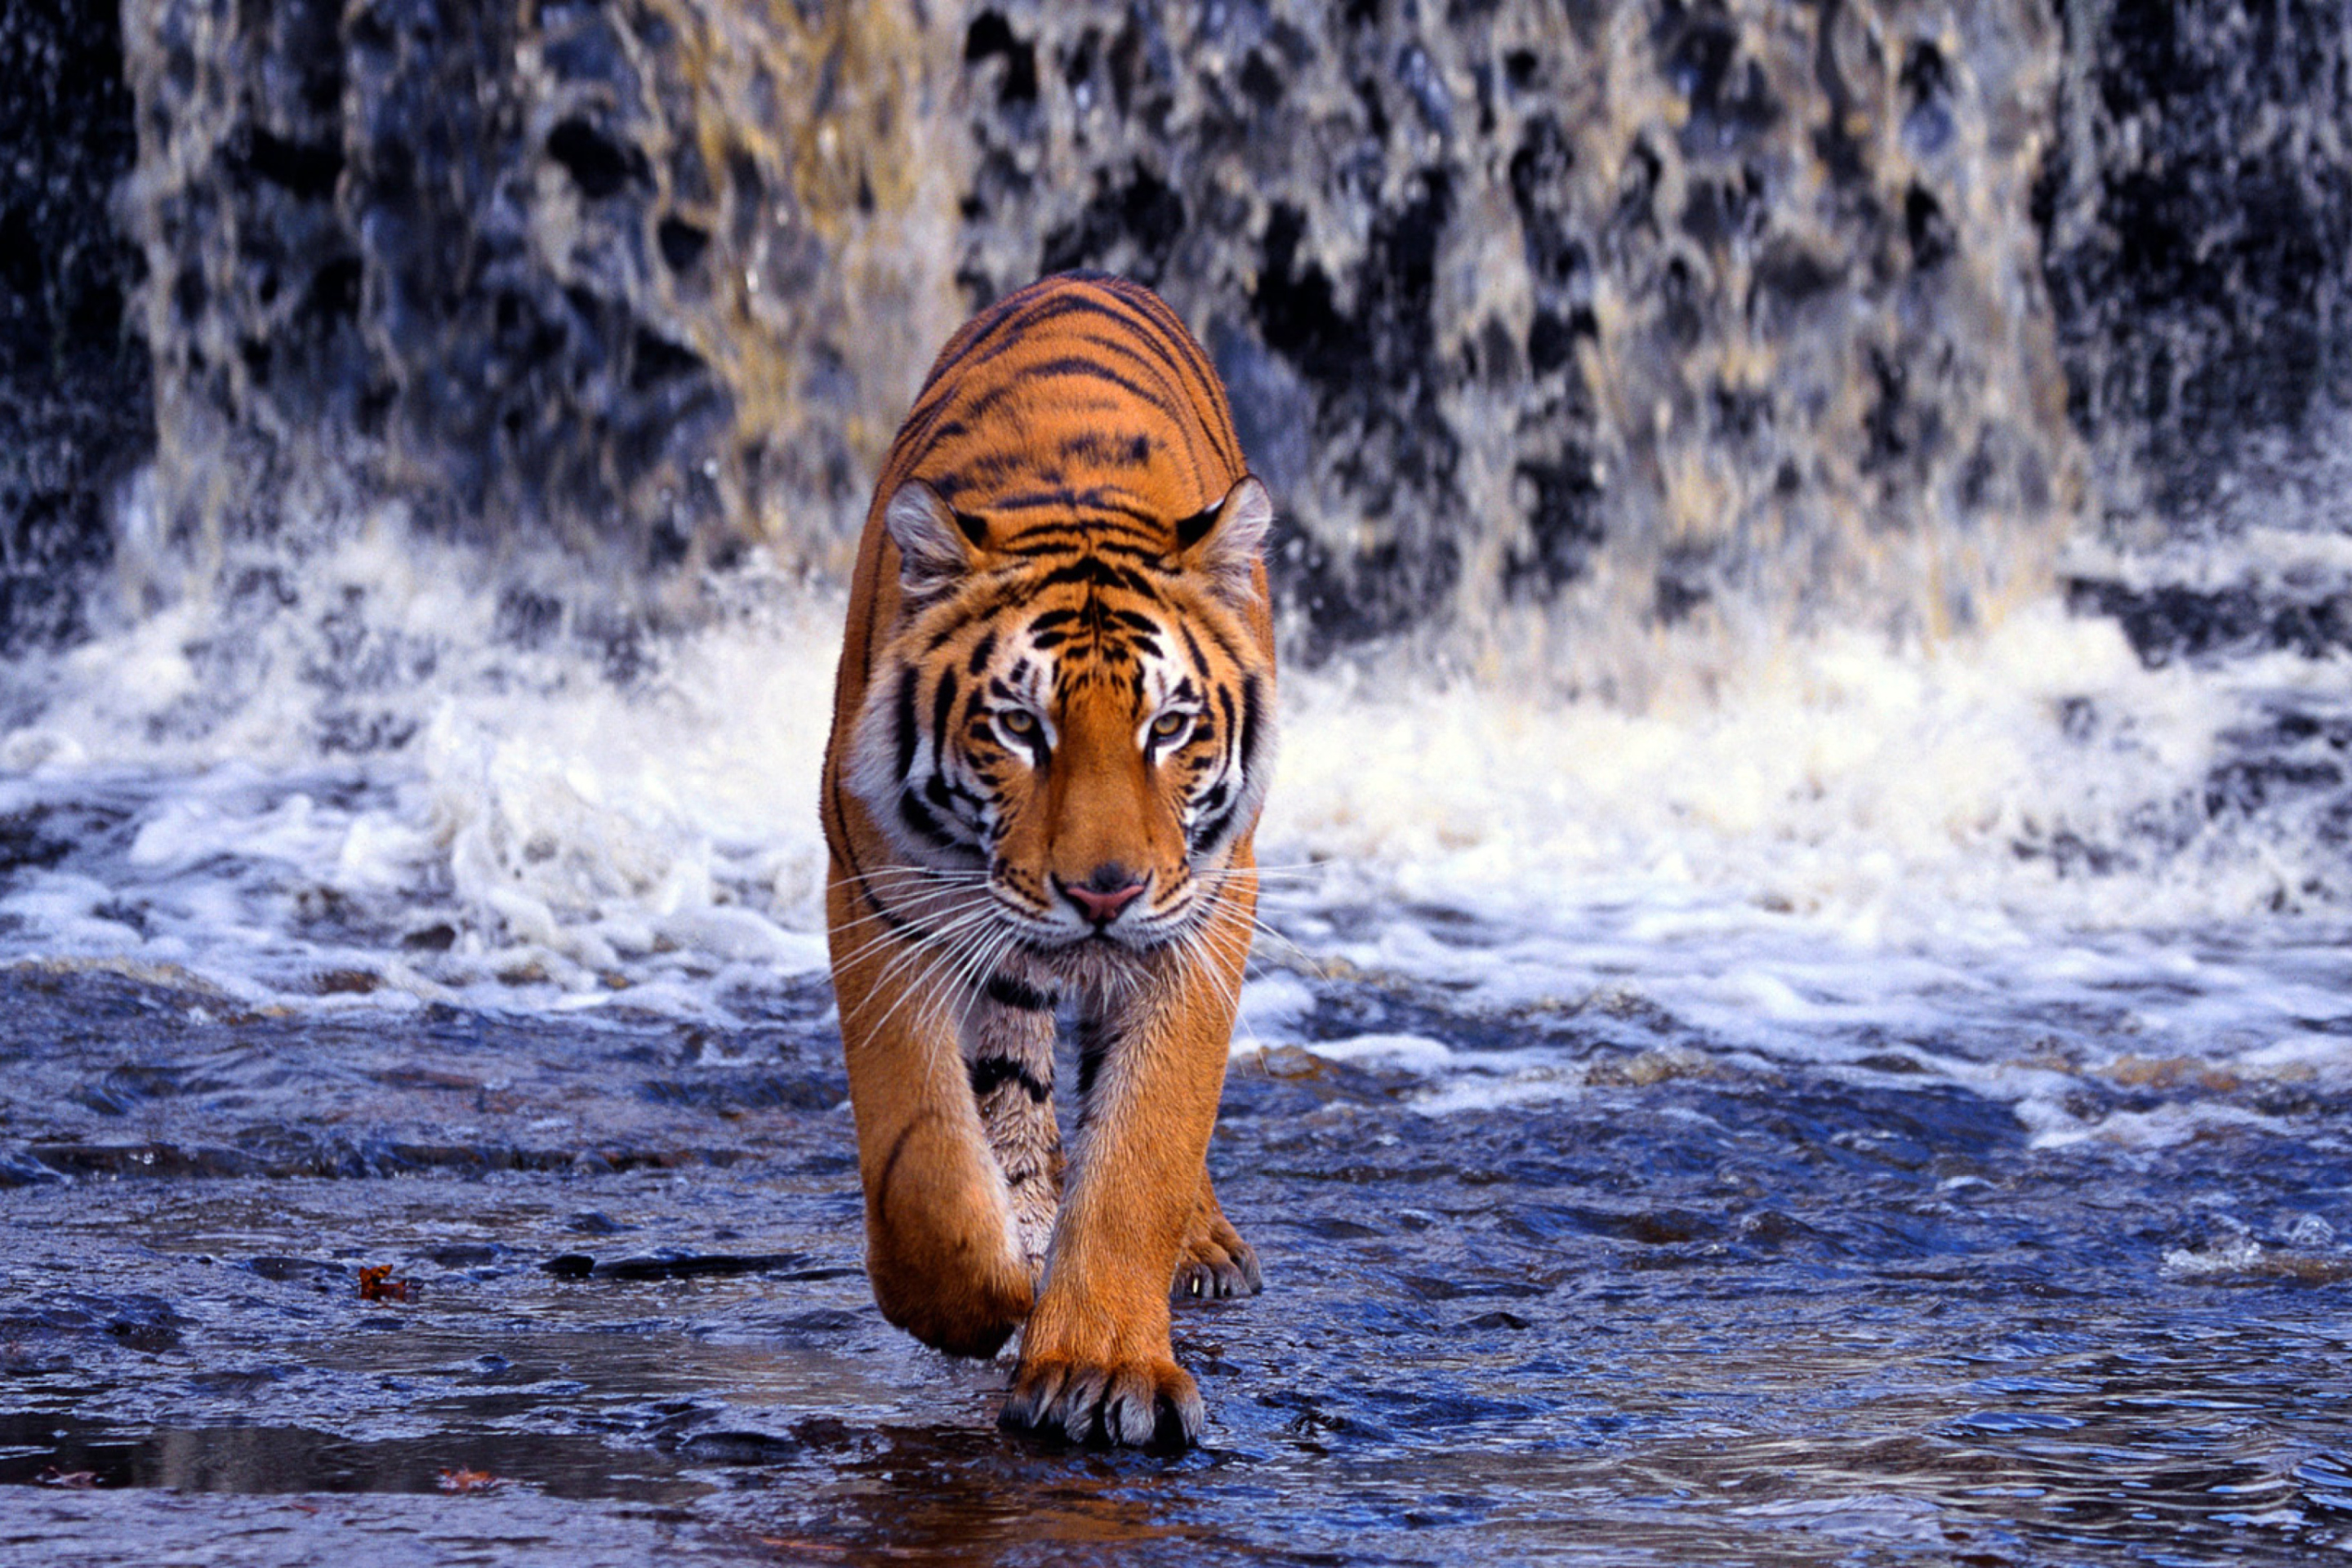 Tiger In Front Of Waterfall wallpaper 2880x1920